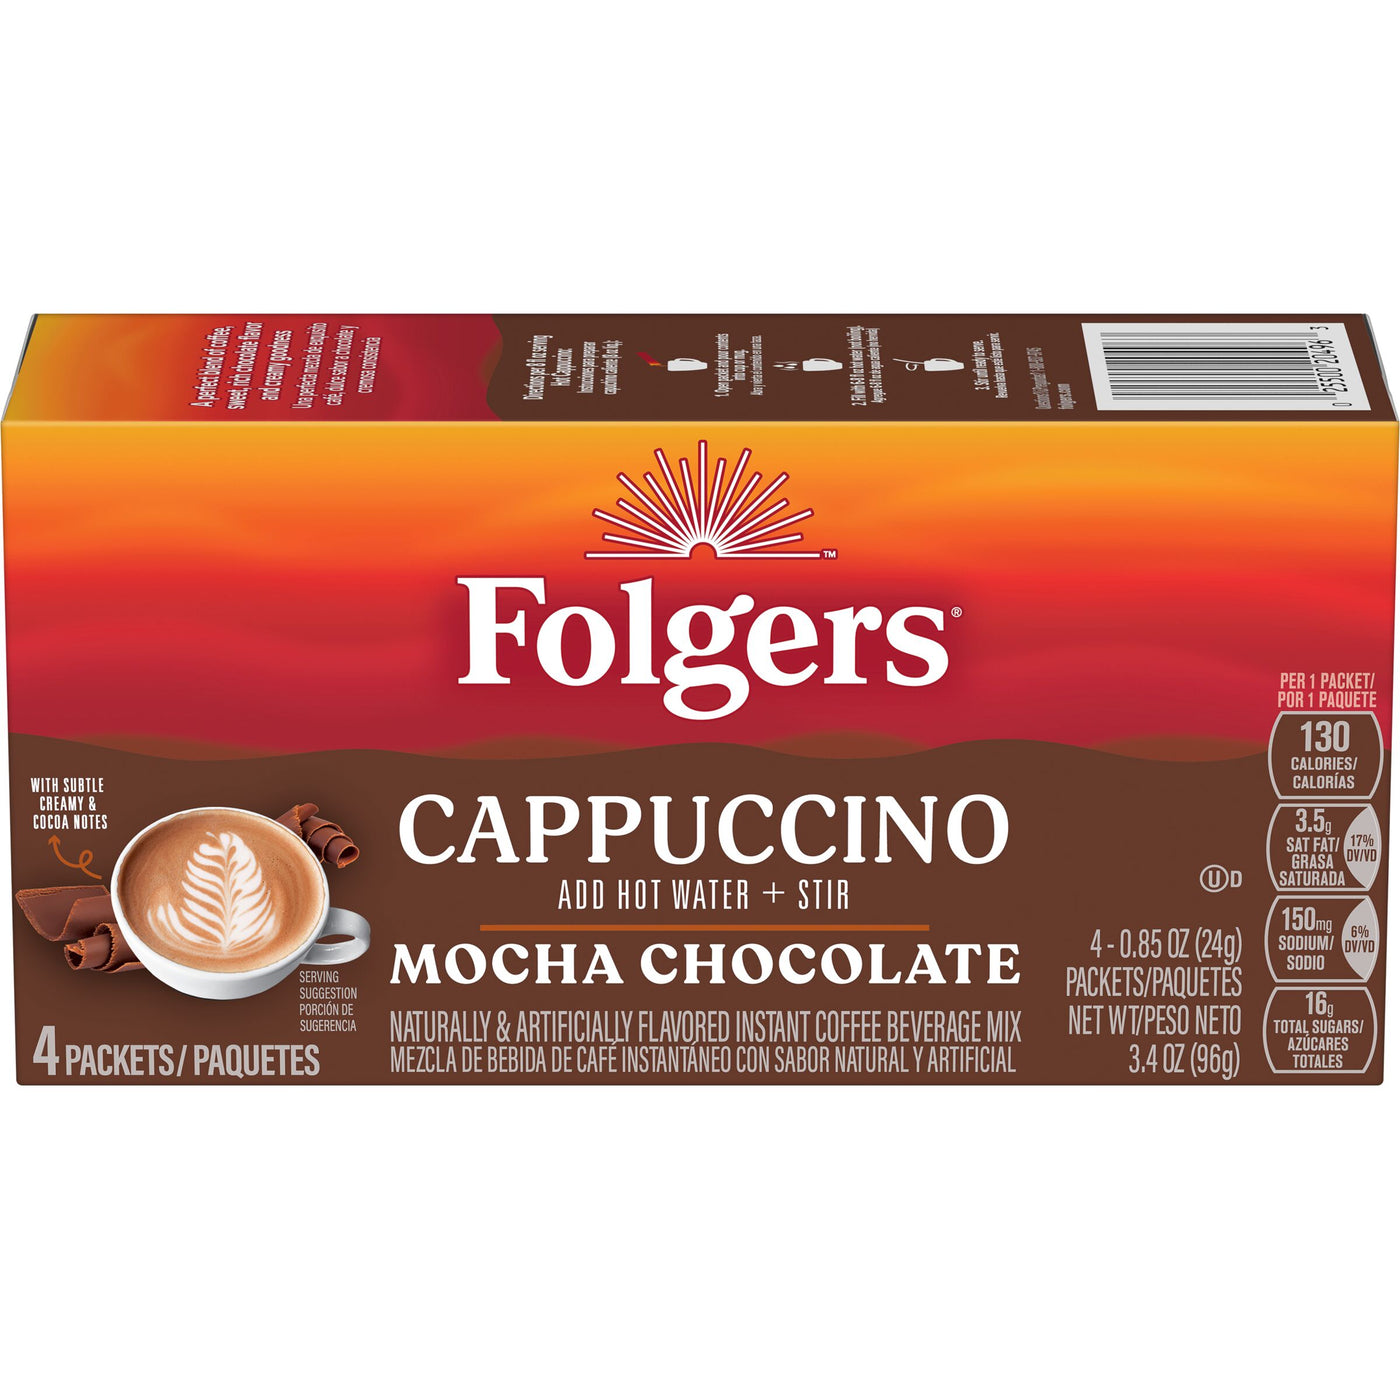 Folgers Mocha Chocolate Flavored Cappuccino Packets, 4 Count